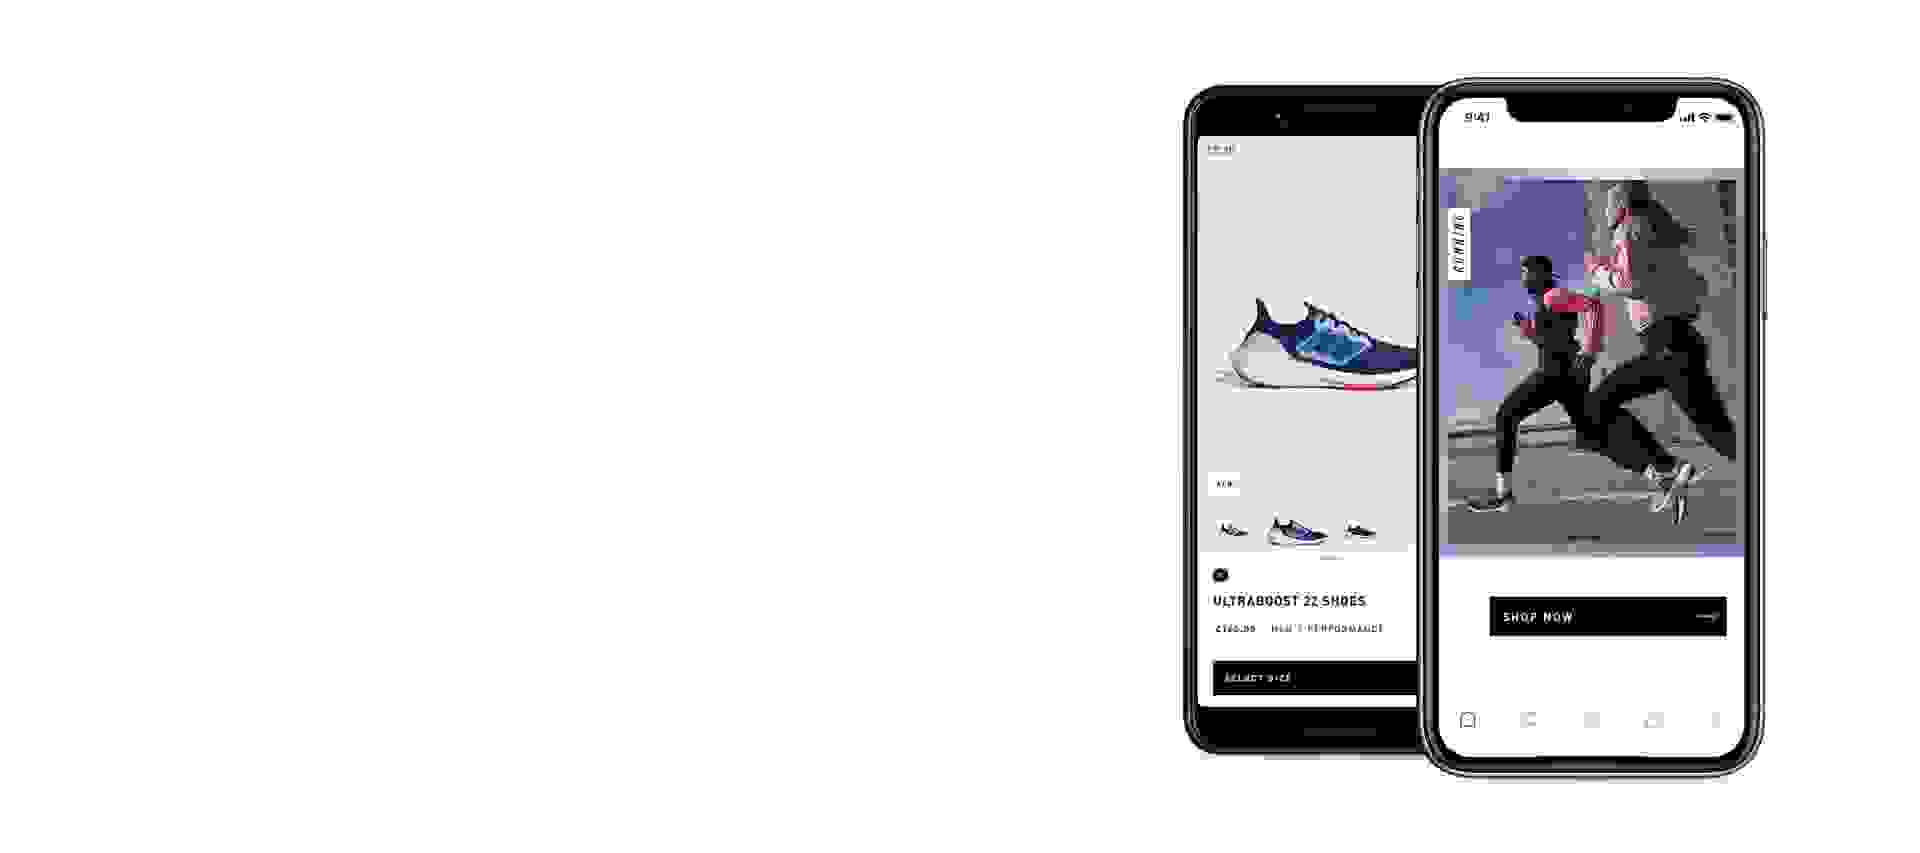 about the adidas apps.